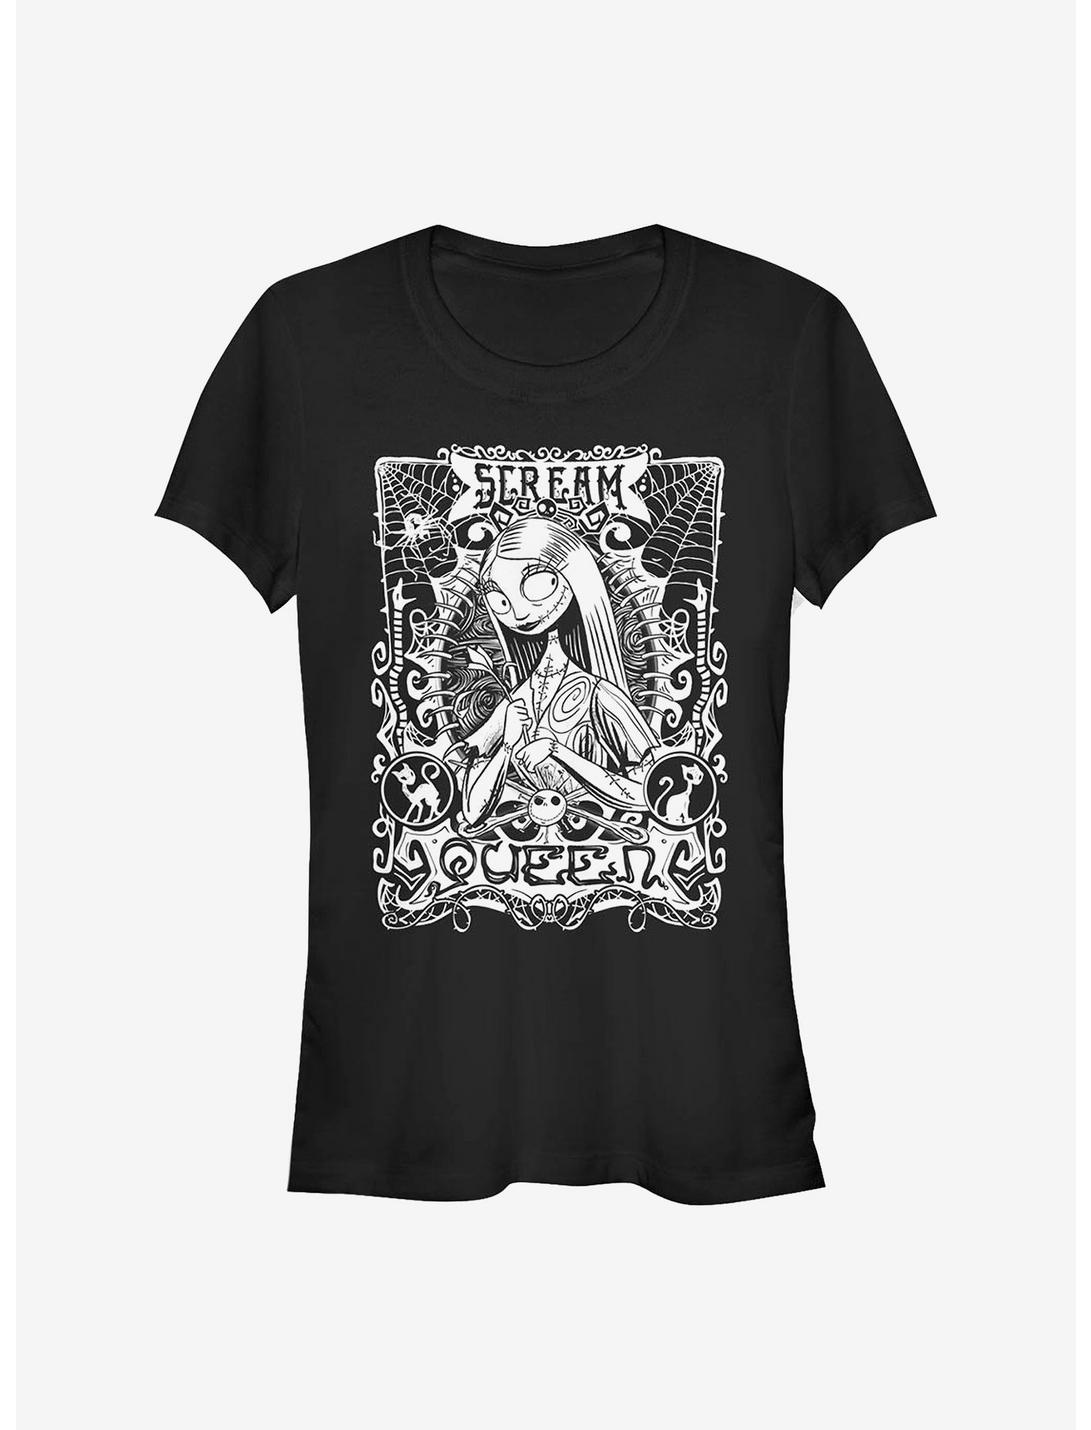 The Nightmare Before Christmas Sally Nouveau Girls T-Shirt, BLACK, hi-res